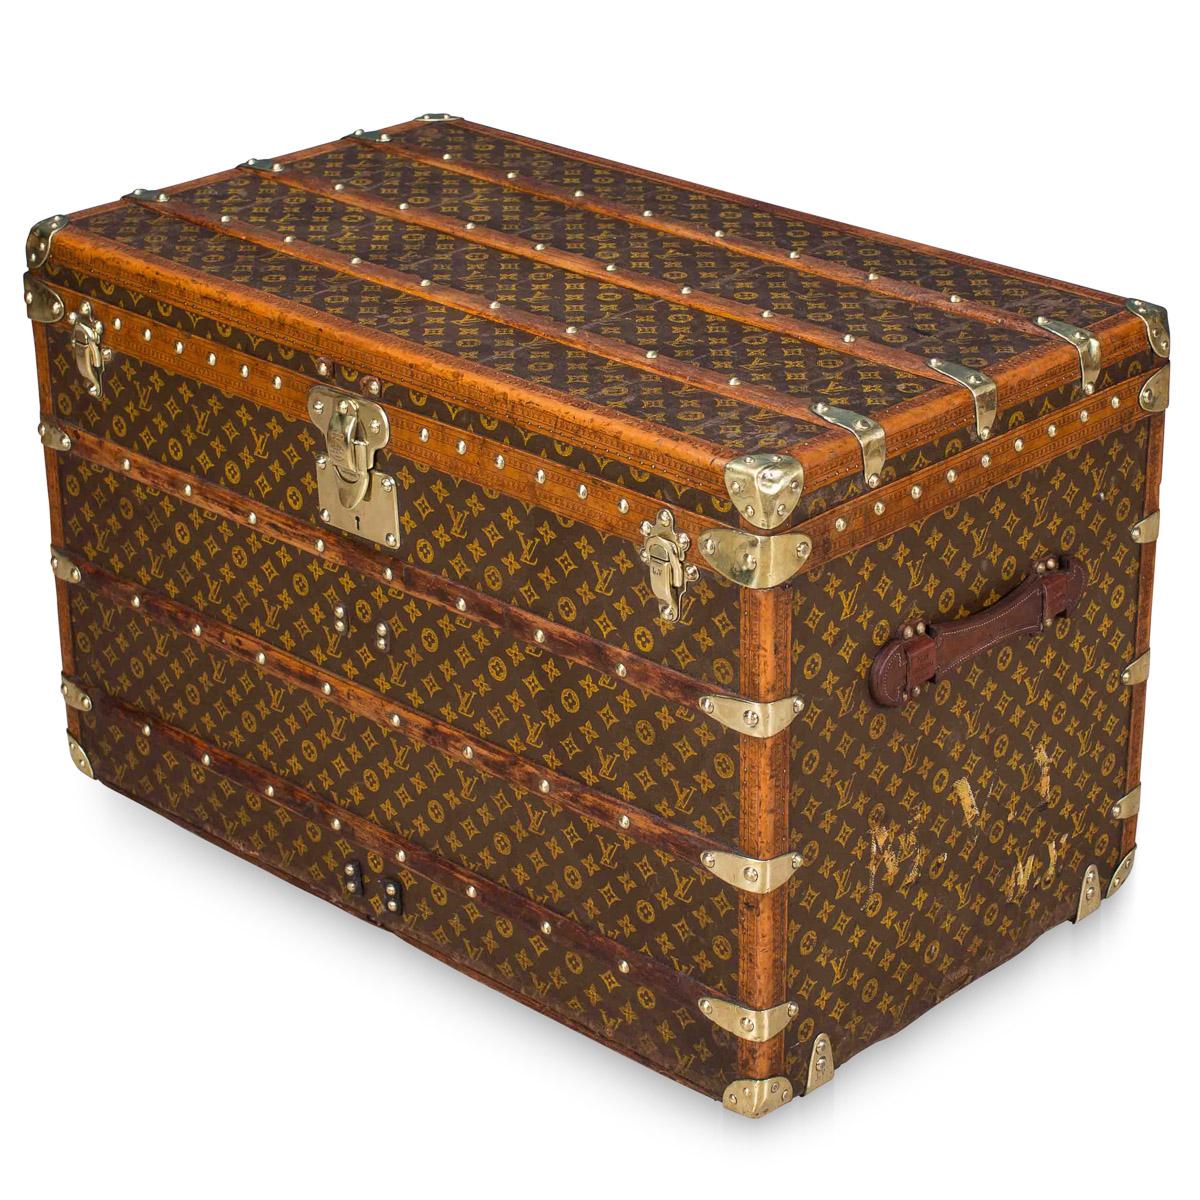 Stunning and most importantly complete, this early 20th century Louis Vuitton trunk was the must have item of any elite traveller. Covered in the world famous LV monogrammed canvas, with its lozine borders and brass fitting it would have been the